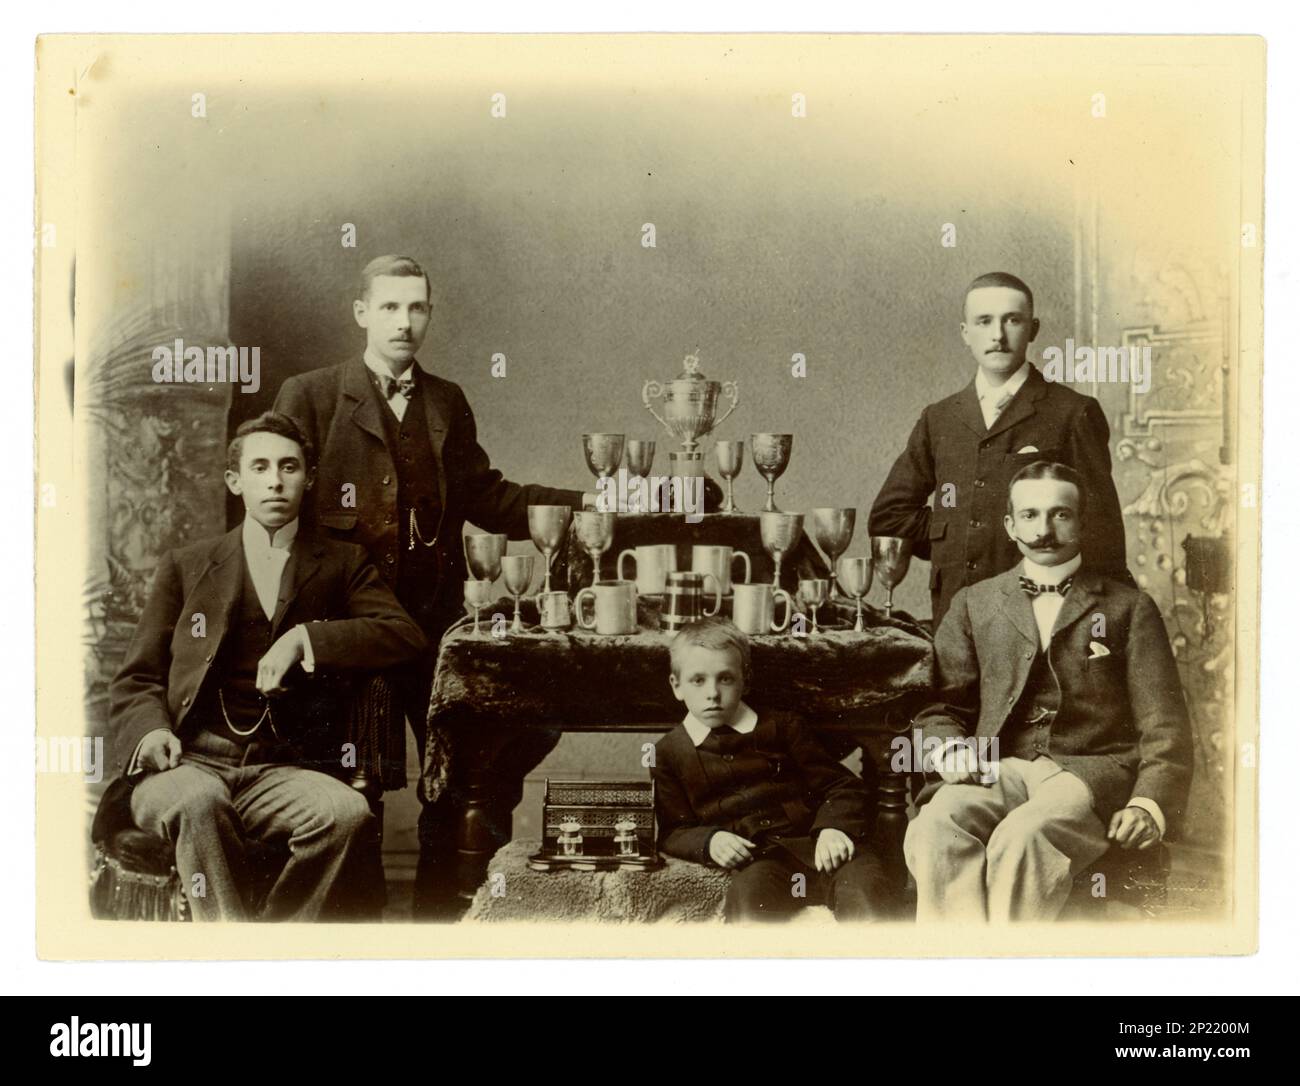 Original Victorian photograph group portrait of gents and a child.  On a table there is displayed a large Worcester challenge vase, / regatta trophy for rowing, and other cups, Possibly members of a coxed four crew. Worcester area, U.K.  circa 1897-1899. Stock Photo